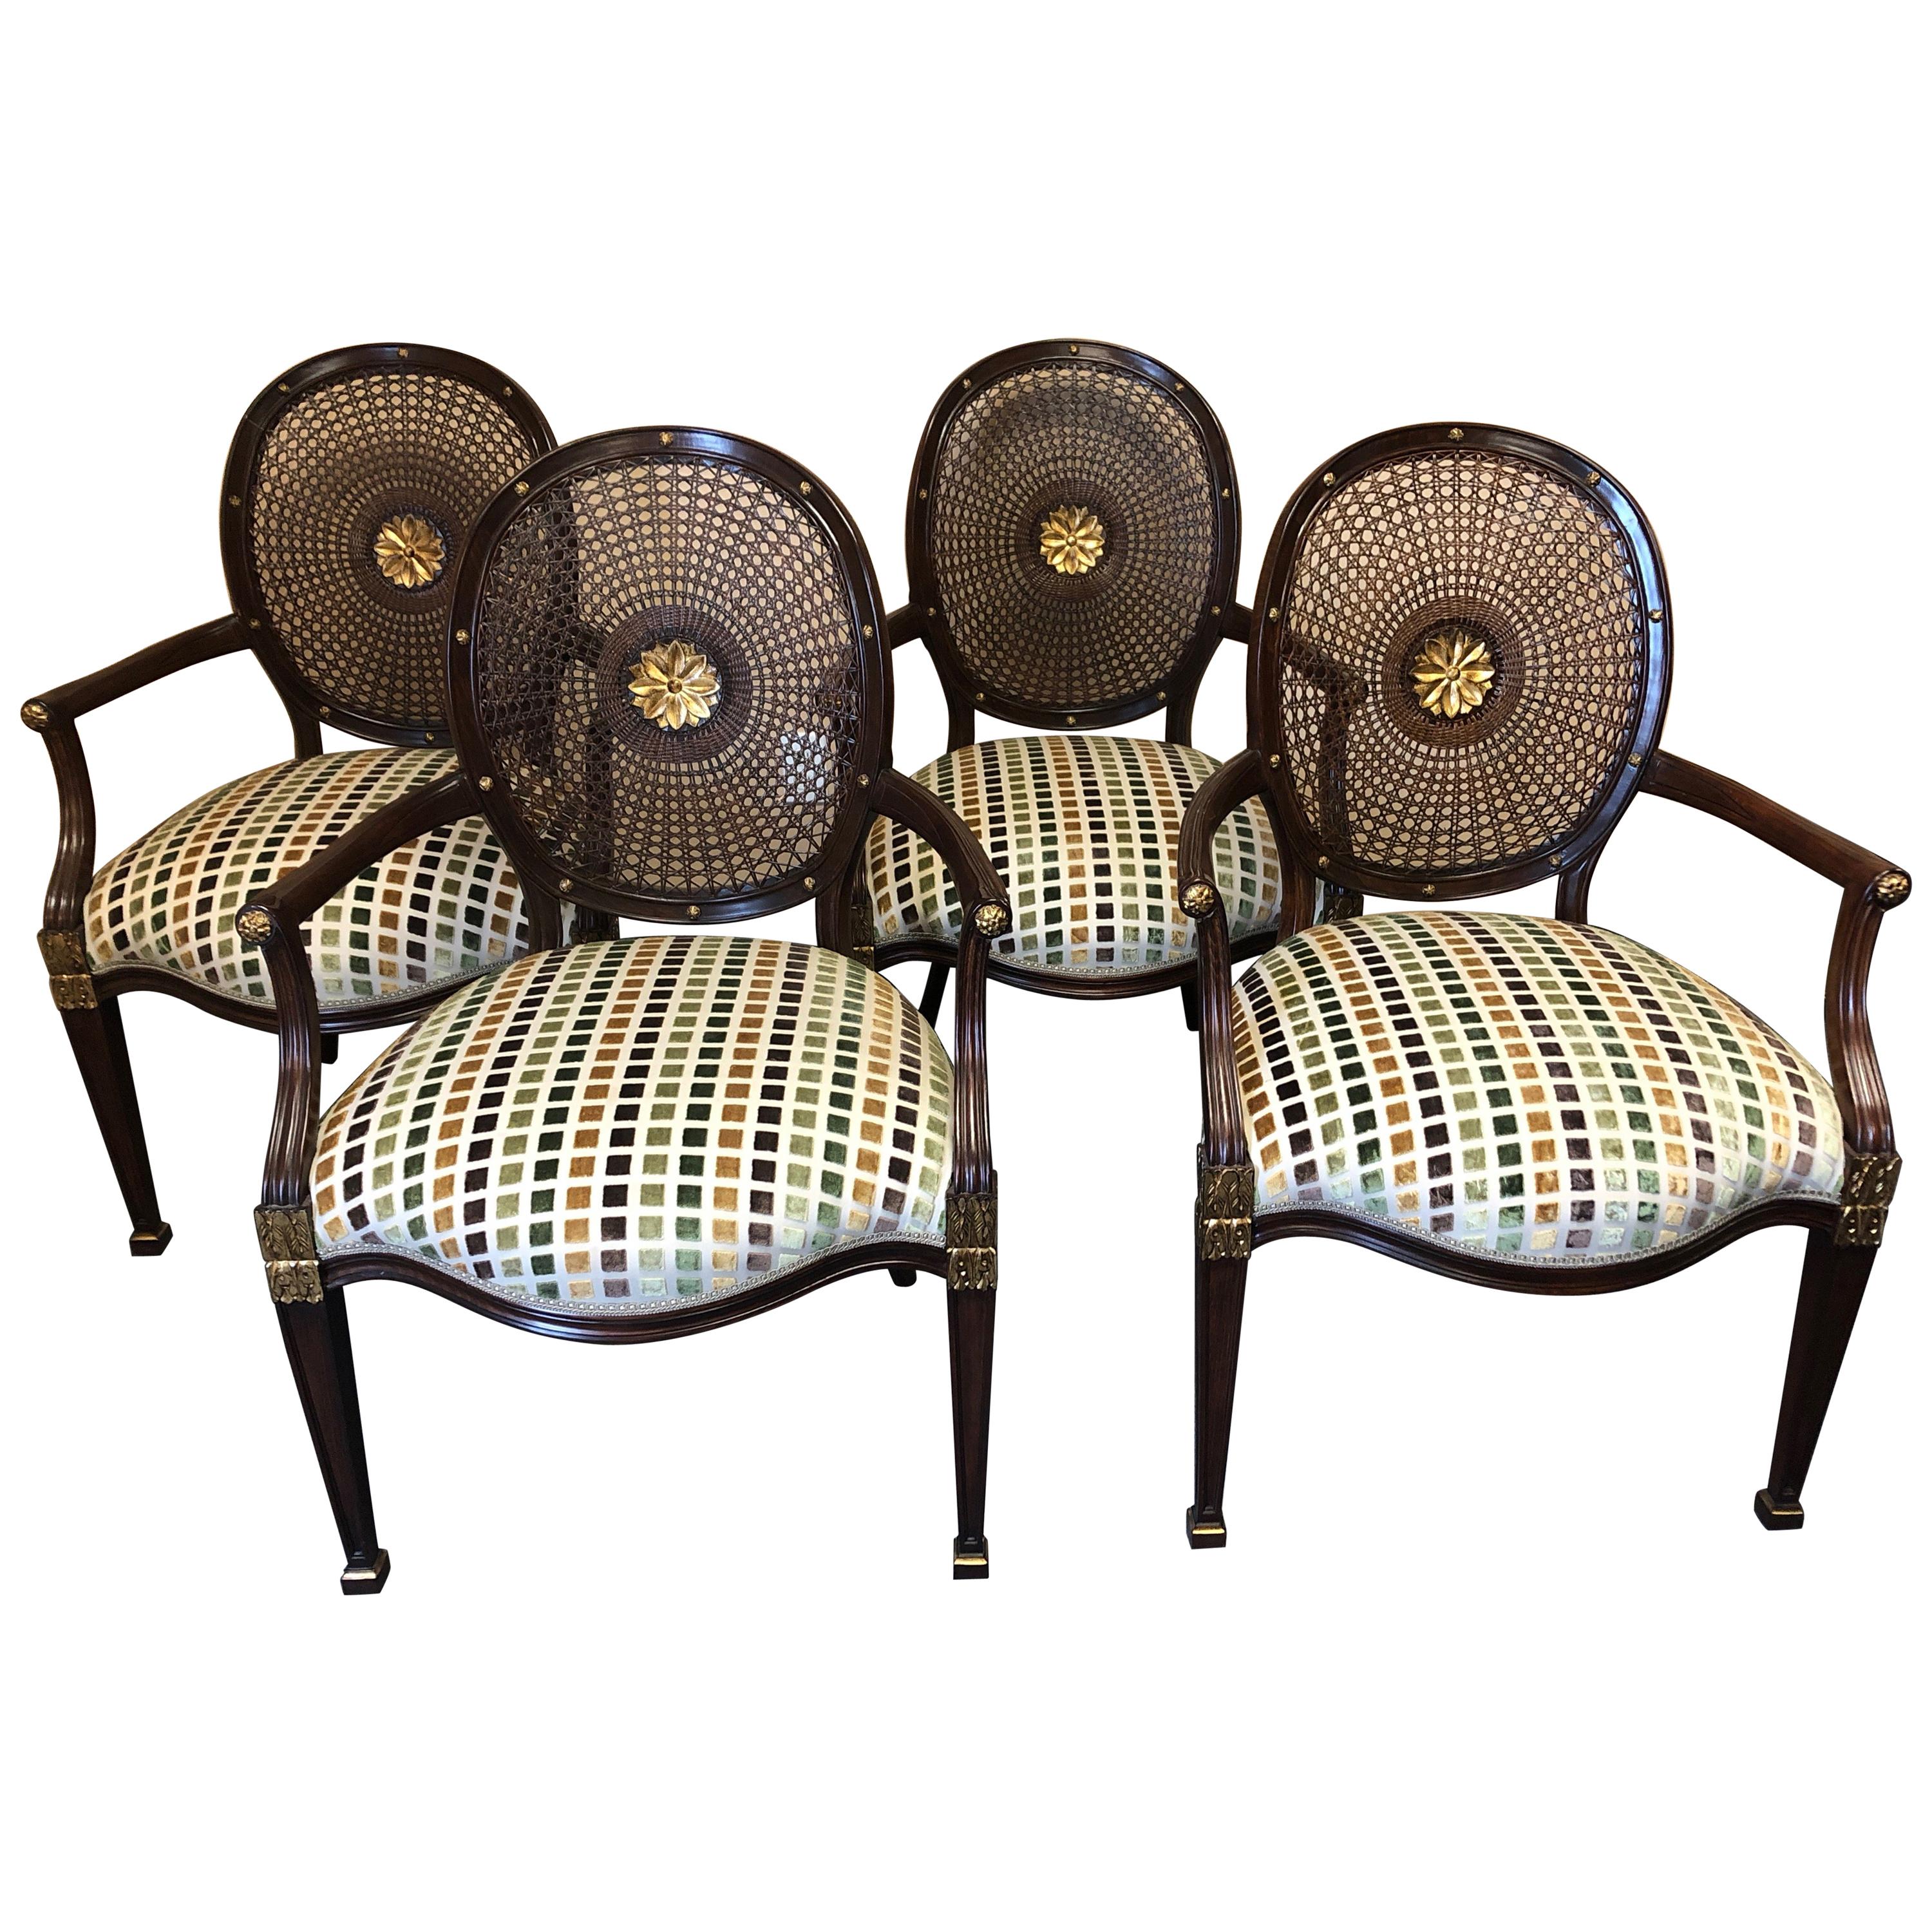 Set of 4 Oval Caned Back Regency Style Arm or Dining Chairs with Gilded Details